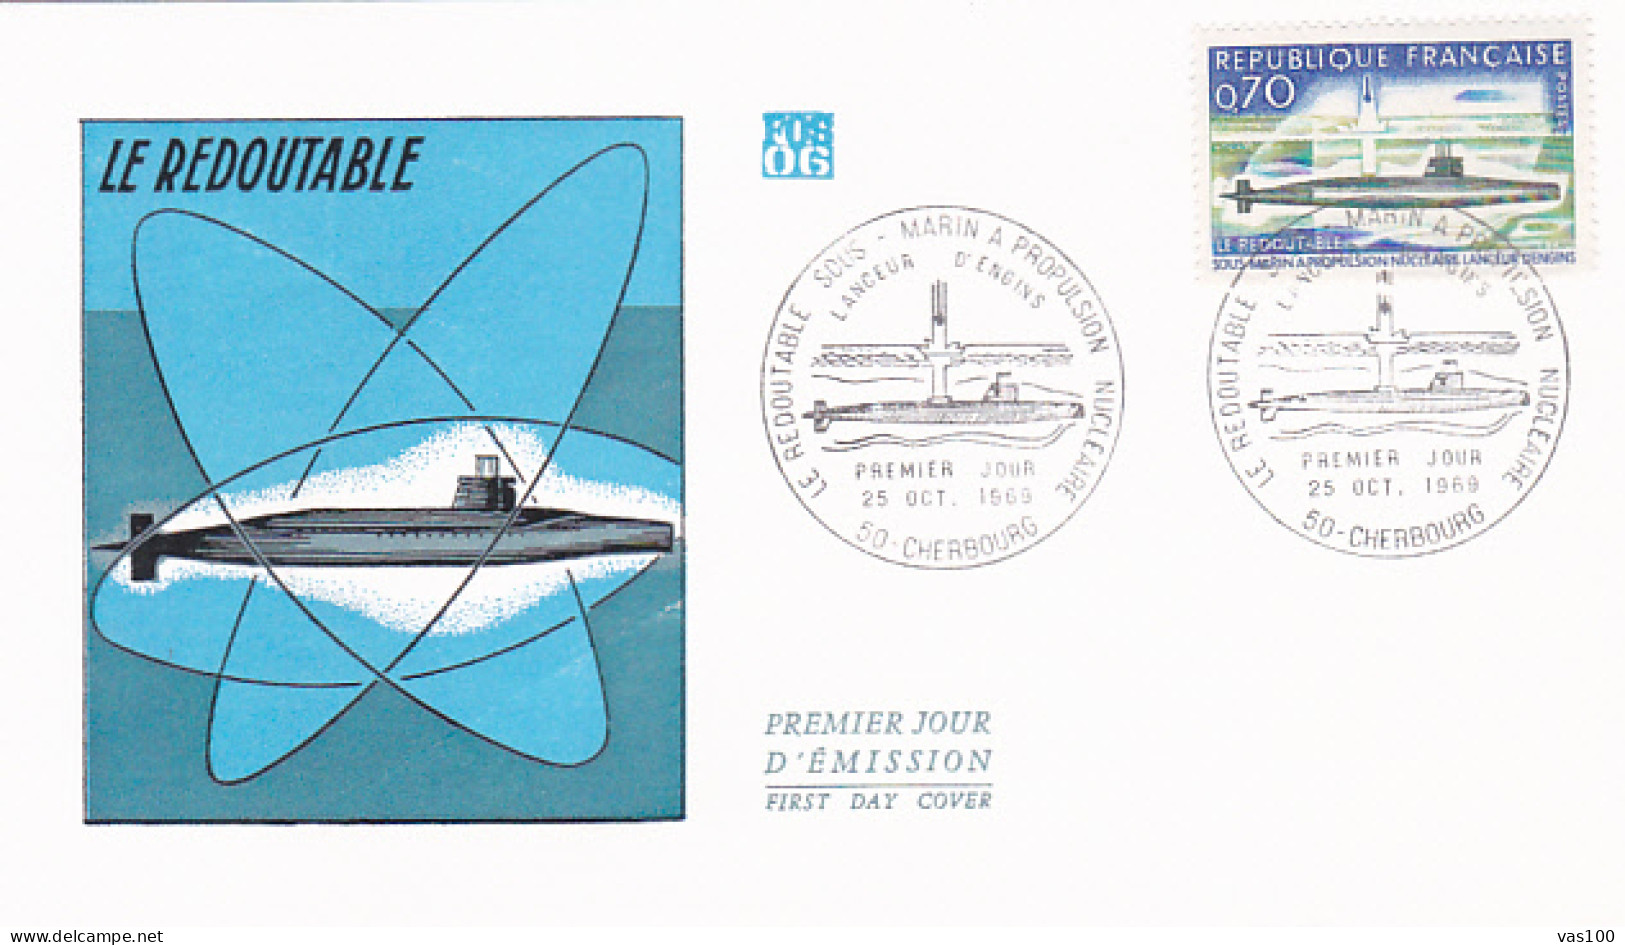 TRANSPORTS, SUBMARINES, REDOUTABLE FRENCH SUBMARINE, COVER FDC, 1969, FRANCE - Duikboten